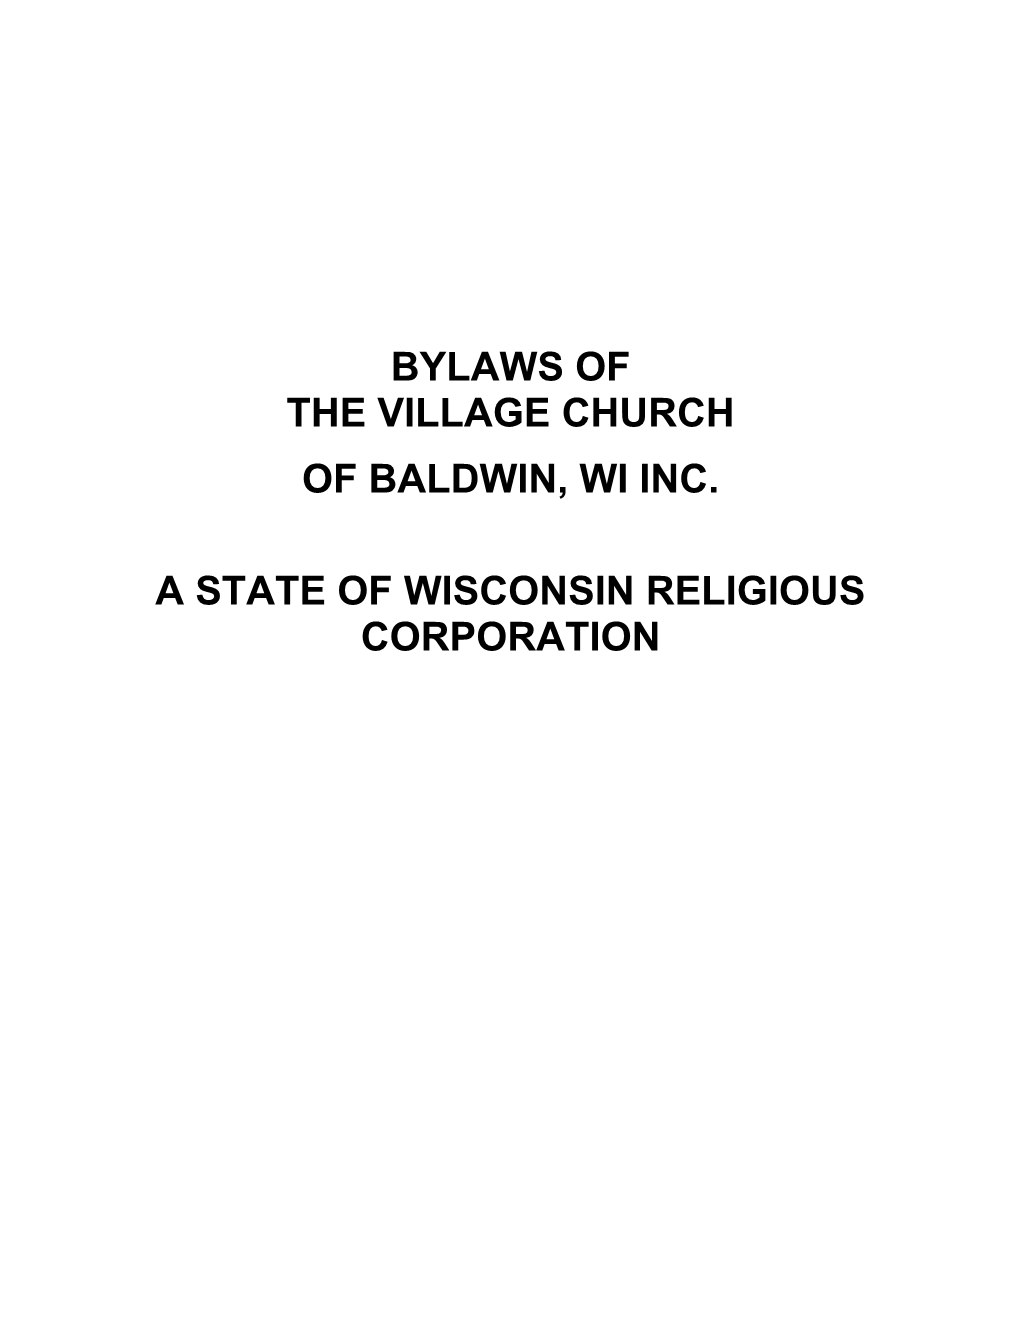 A State of Wisconsin Religious Corporation